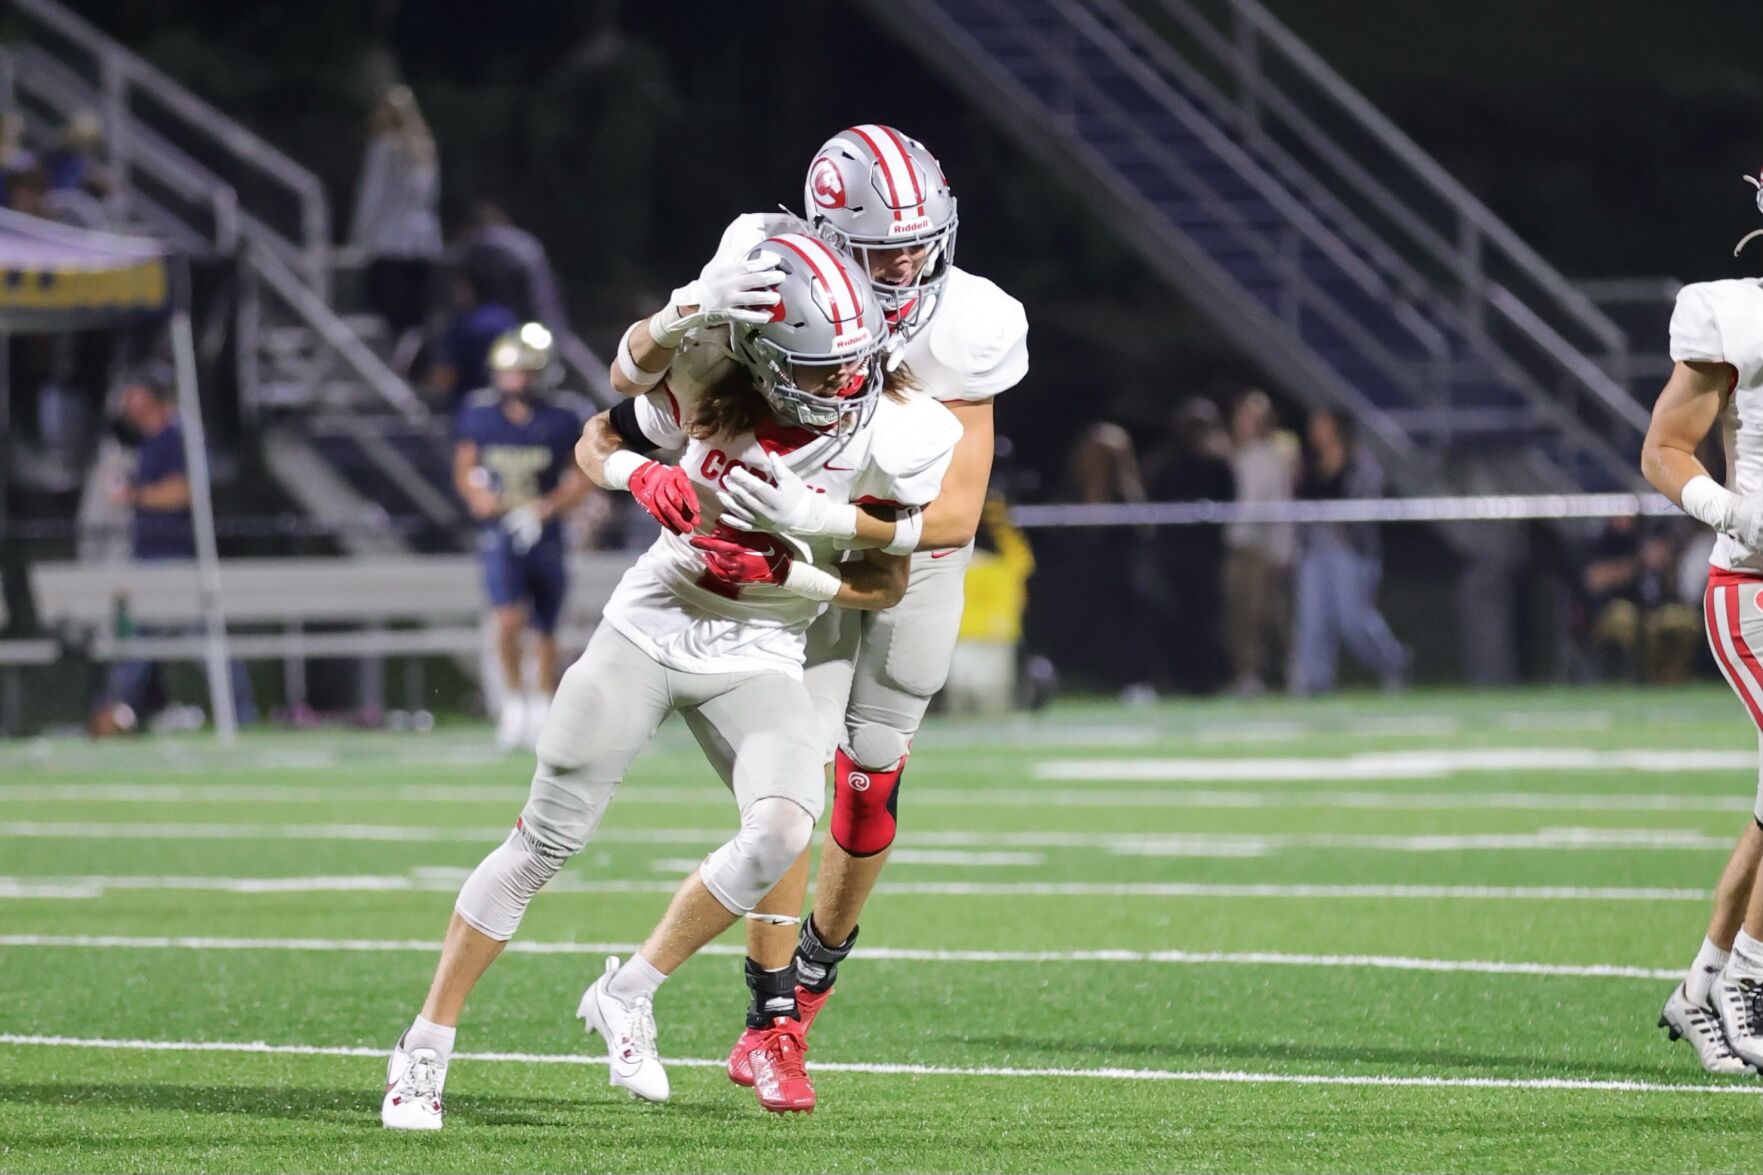 Redhounds remain perfect at 5-0 with 42-0 win over Hazard